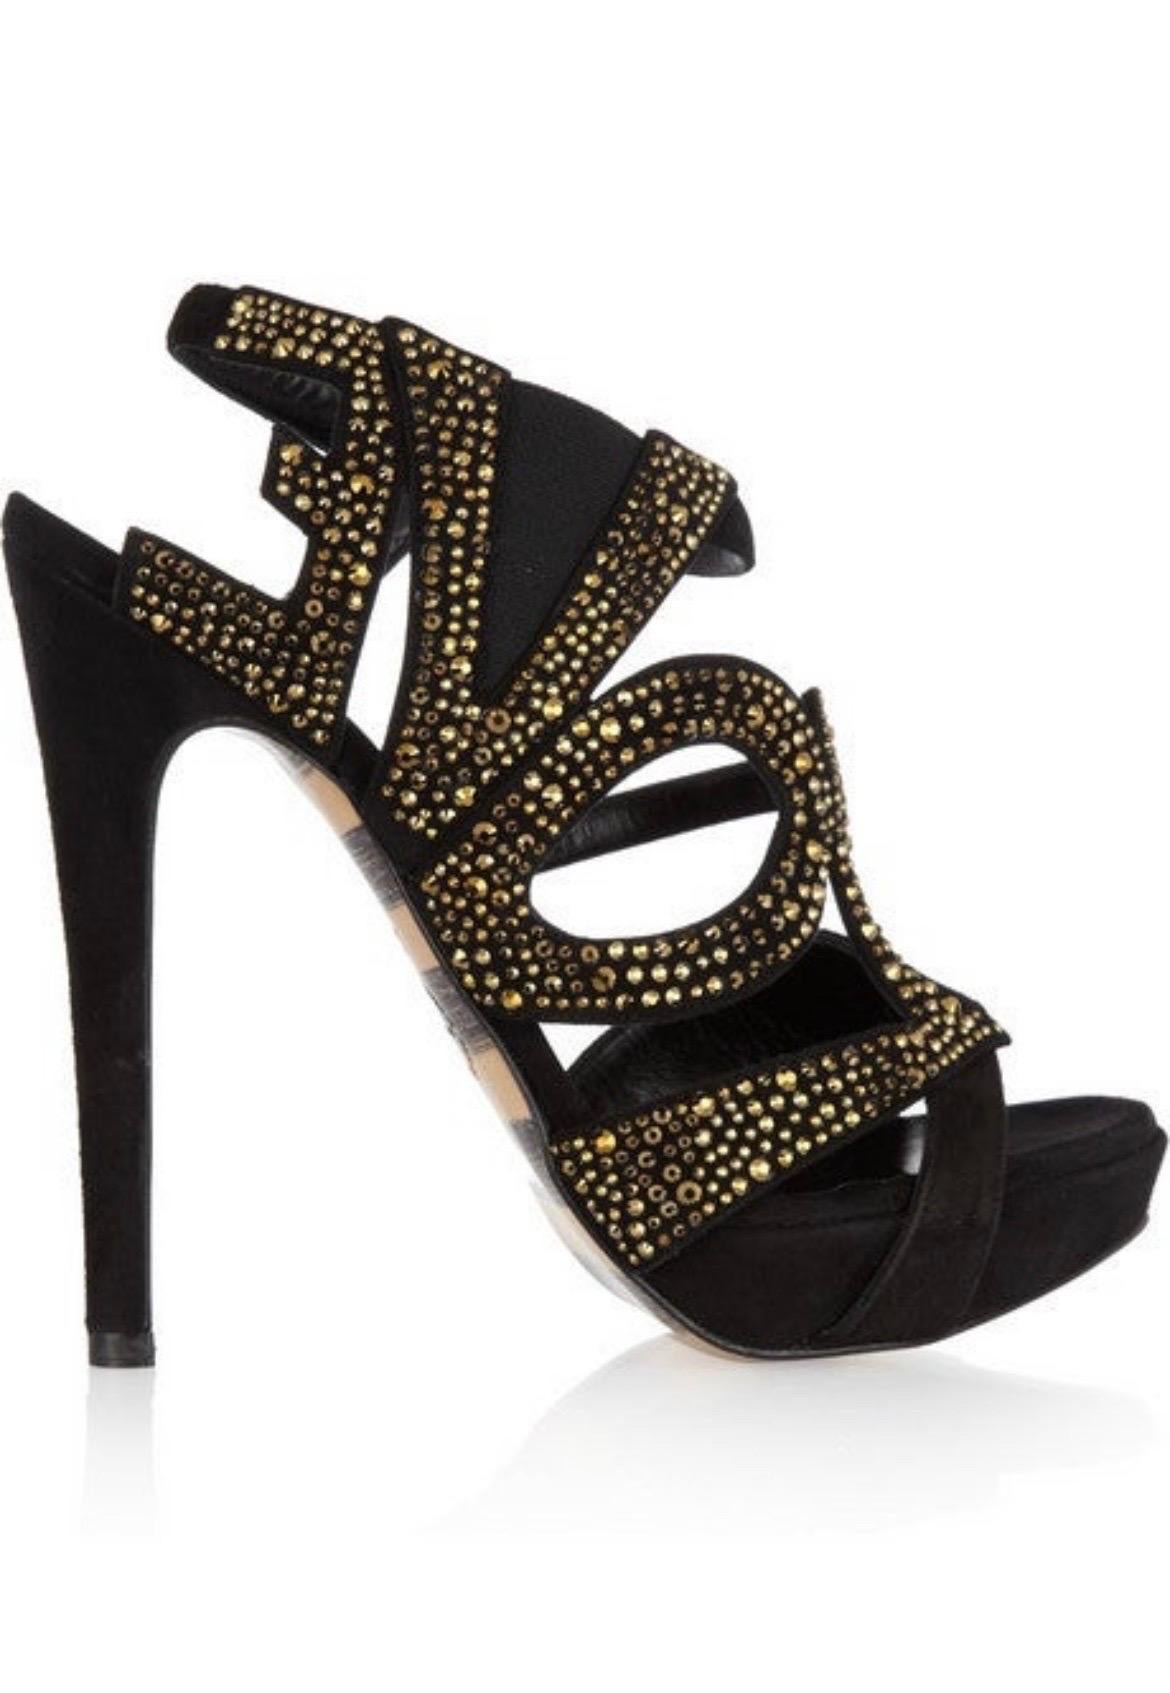 Shake up your cocktail style 
with Georgina Goodman's fabulous crystal-studded sandals.
Team them with a slinky sequined dress for high-shine evening appeal. 
Heel measures approximately 140mm/ 5.5 inches with a 25mm/ 1 inch platform 
Black suede